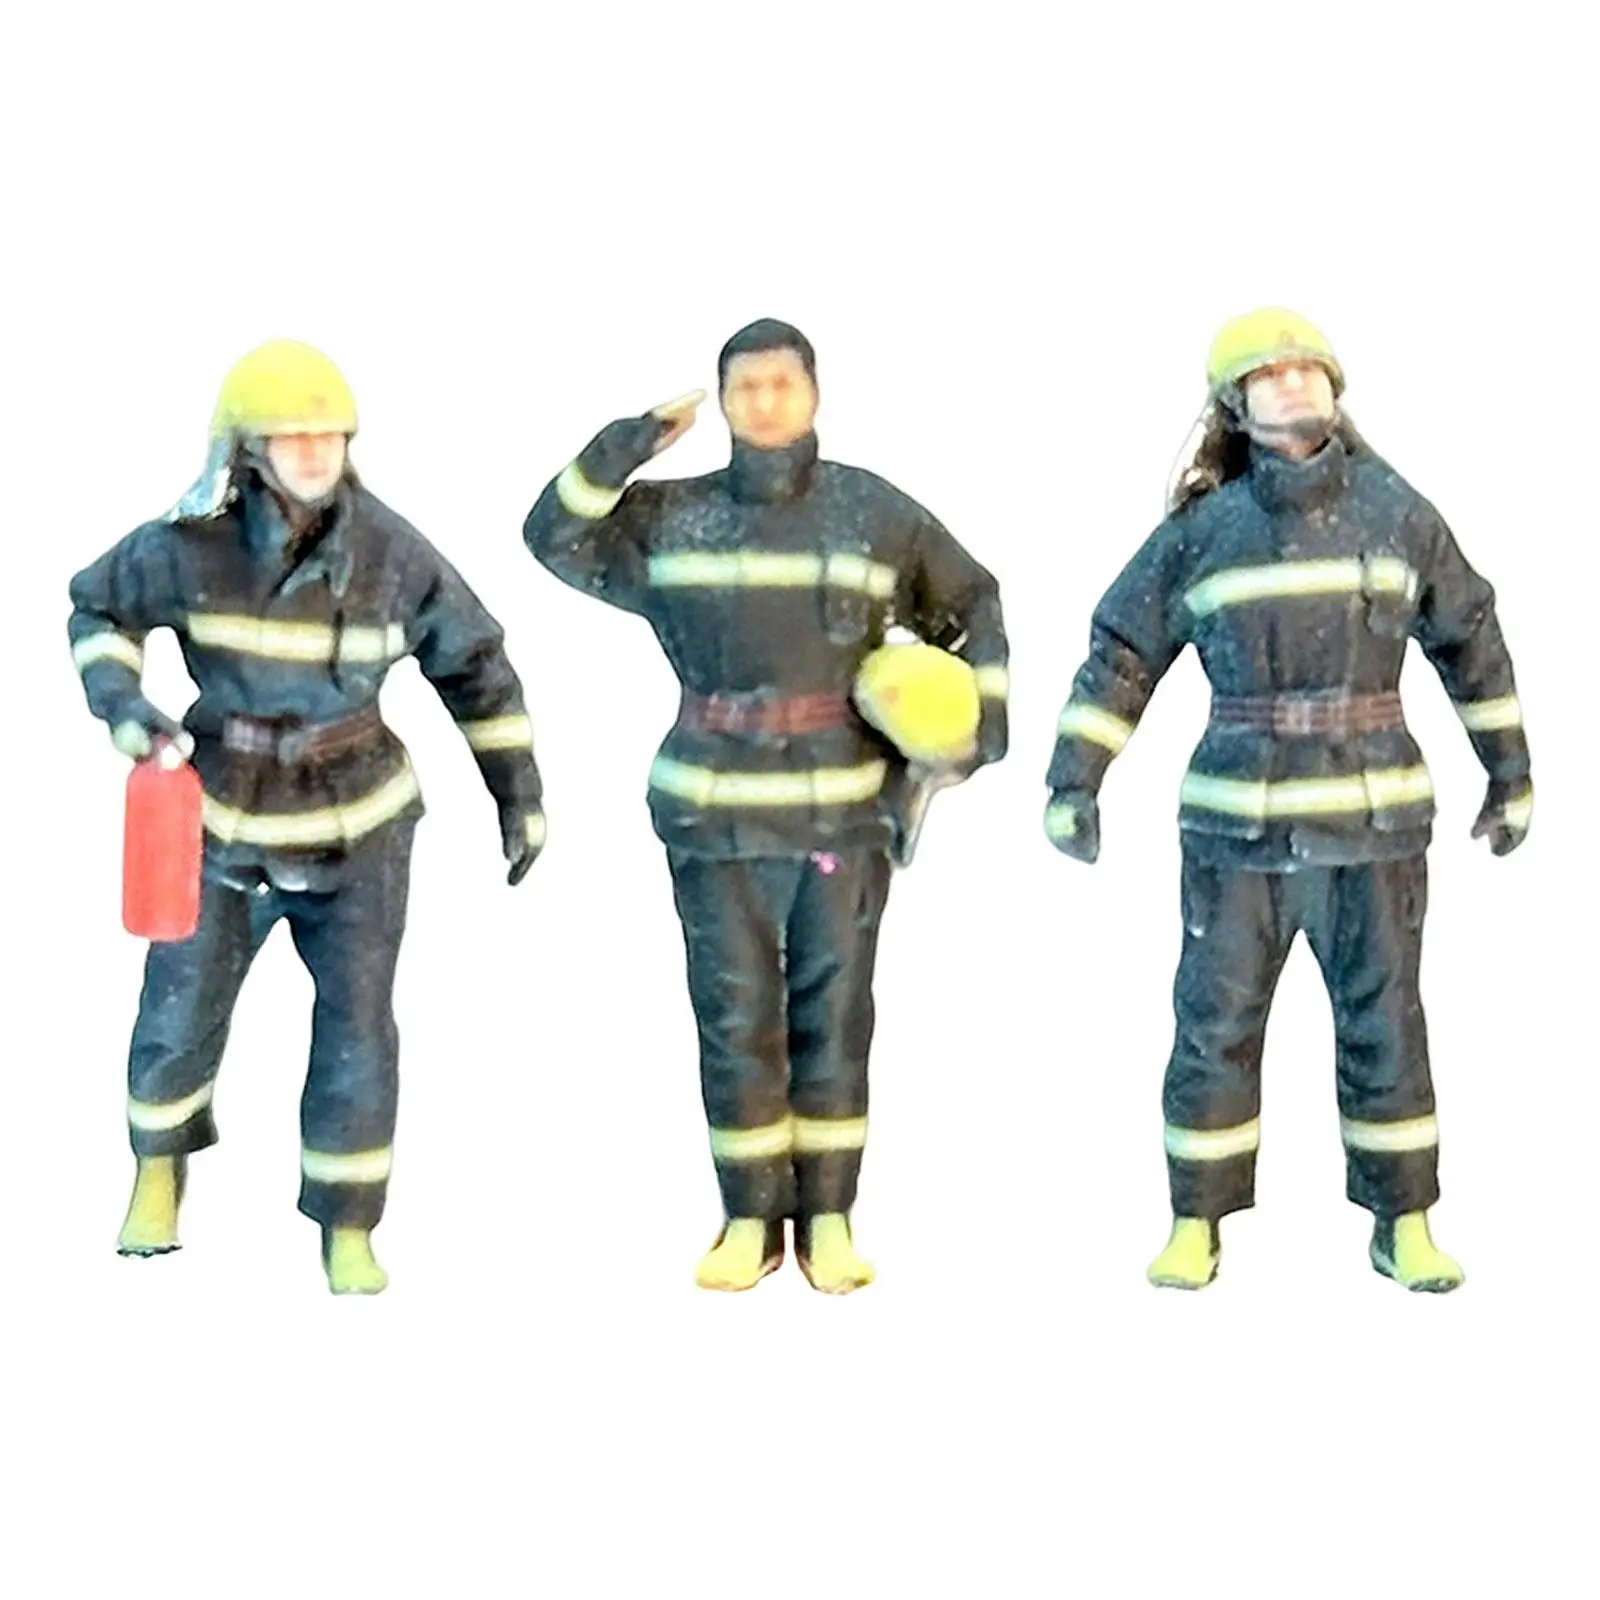 1/64 Resin Firefighter Figures Collection Scene Props Figures Sand Table Ornament for Scenery Landscape Building Diorama Layout